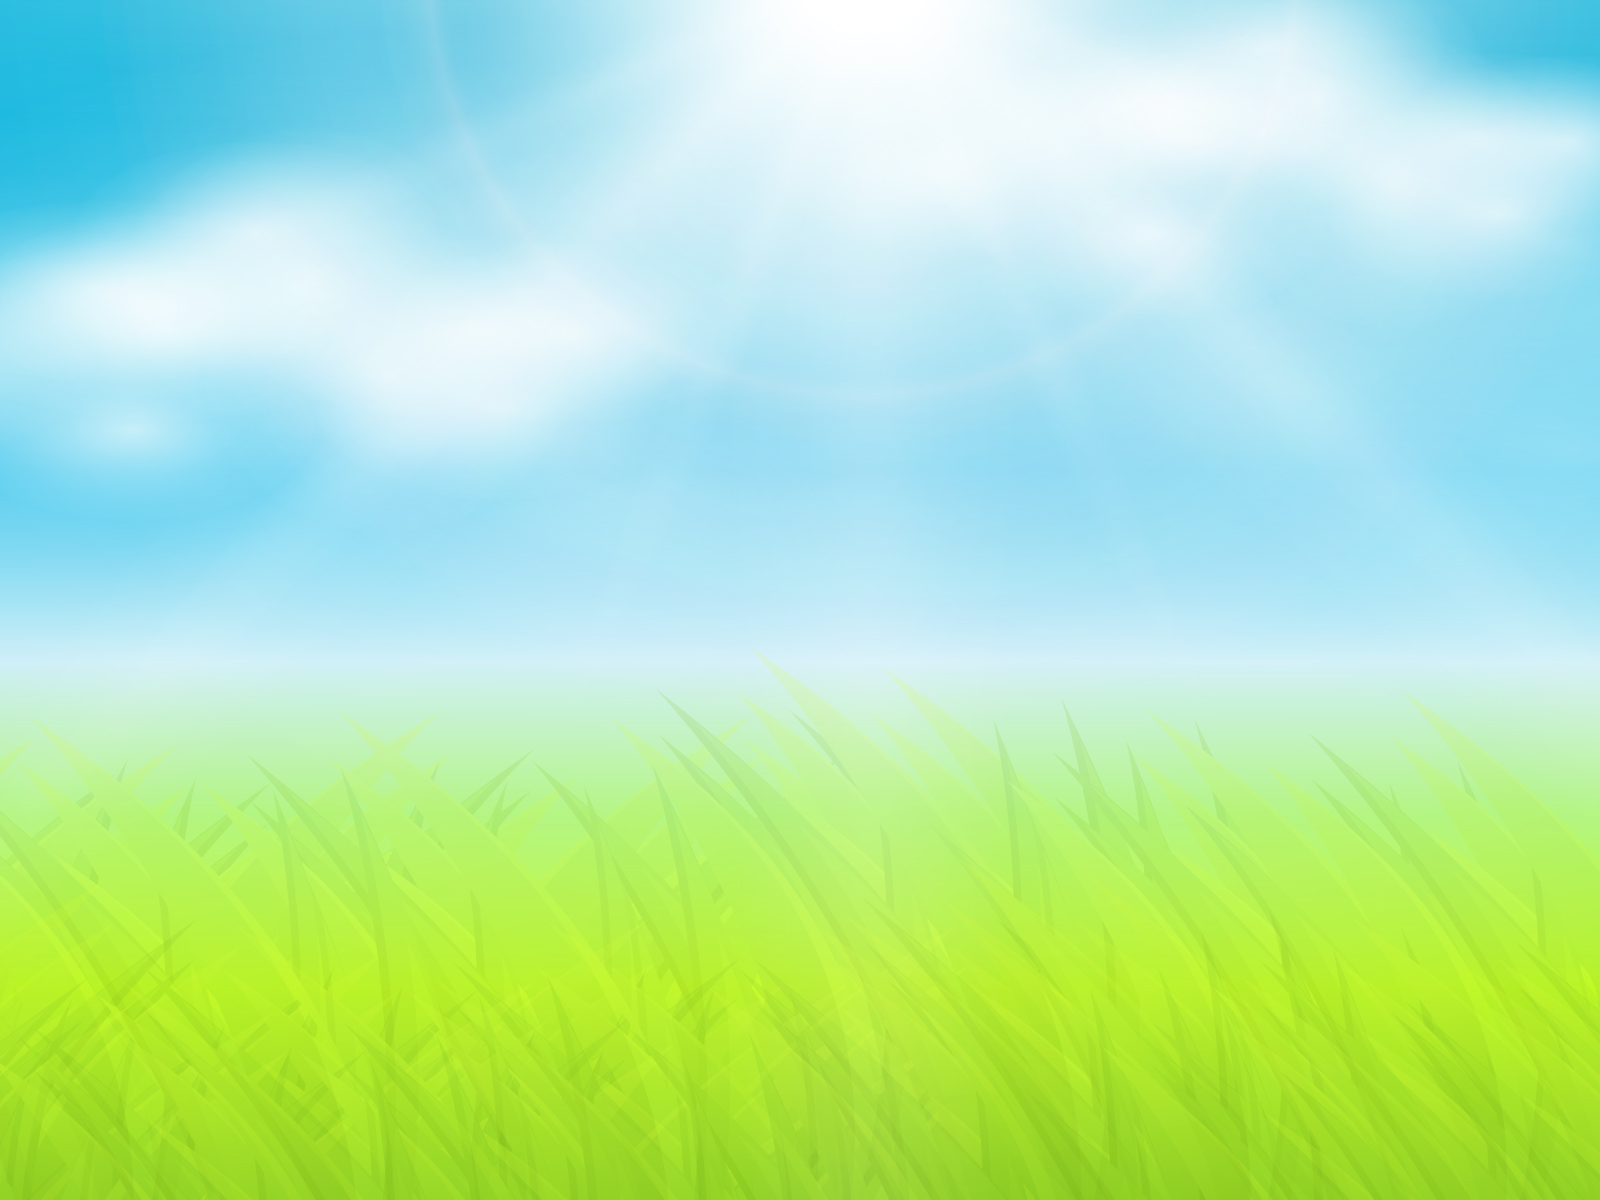 Grass and sun Backgrounds | Blue, Colors, Design, Green, Nature, White,  Yellow Templates | Free PPT Grounds